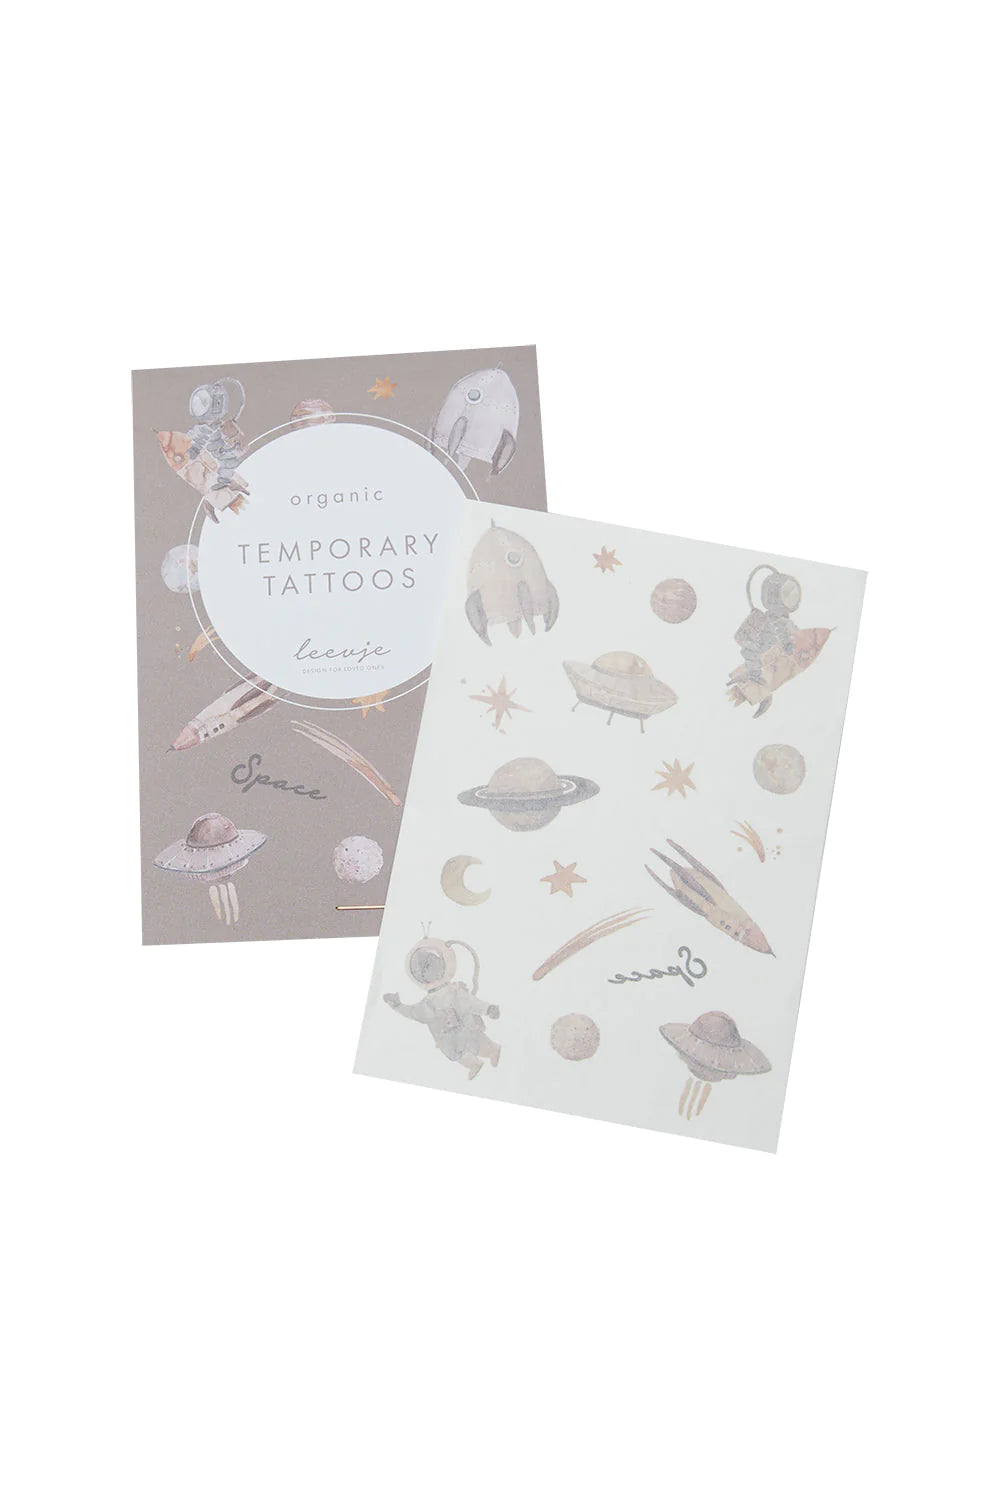 Organic Tattoos 'Universe' - The Little One • Family.Concept.Store. 